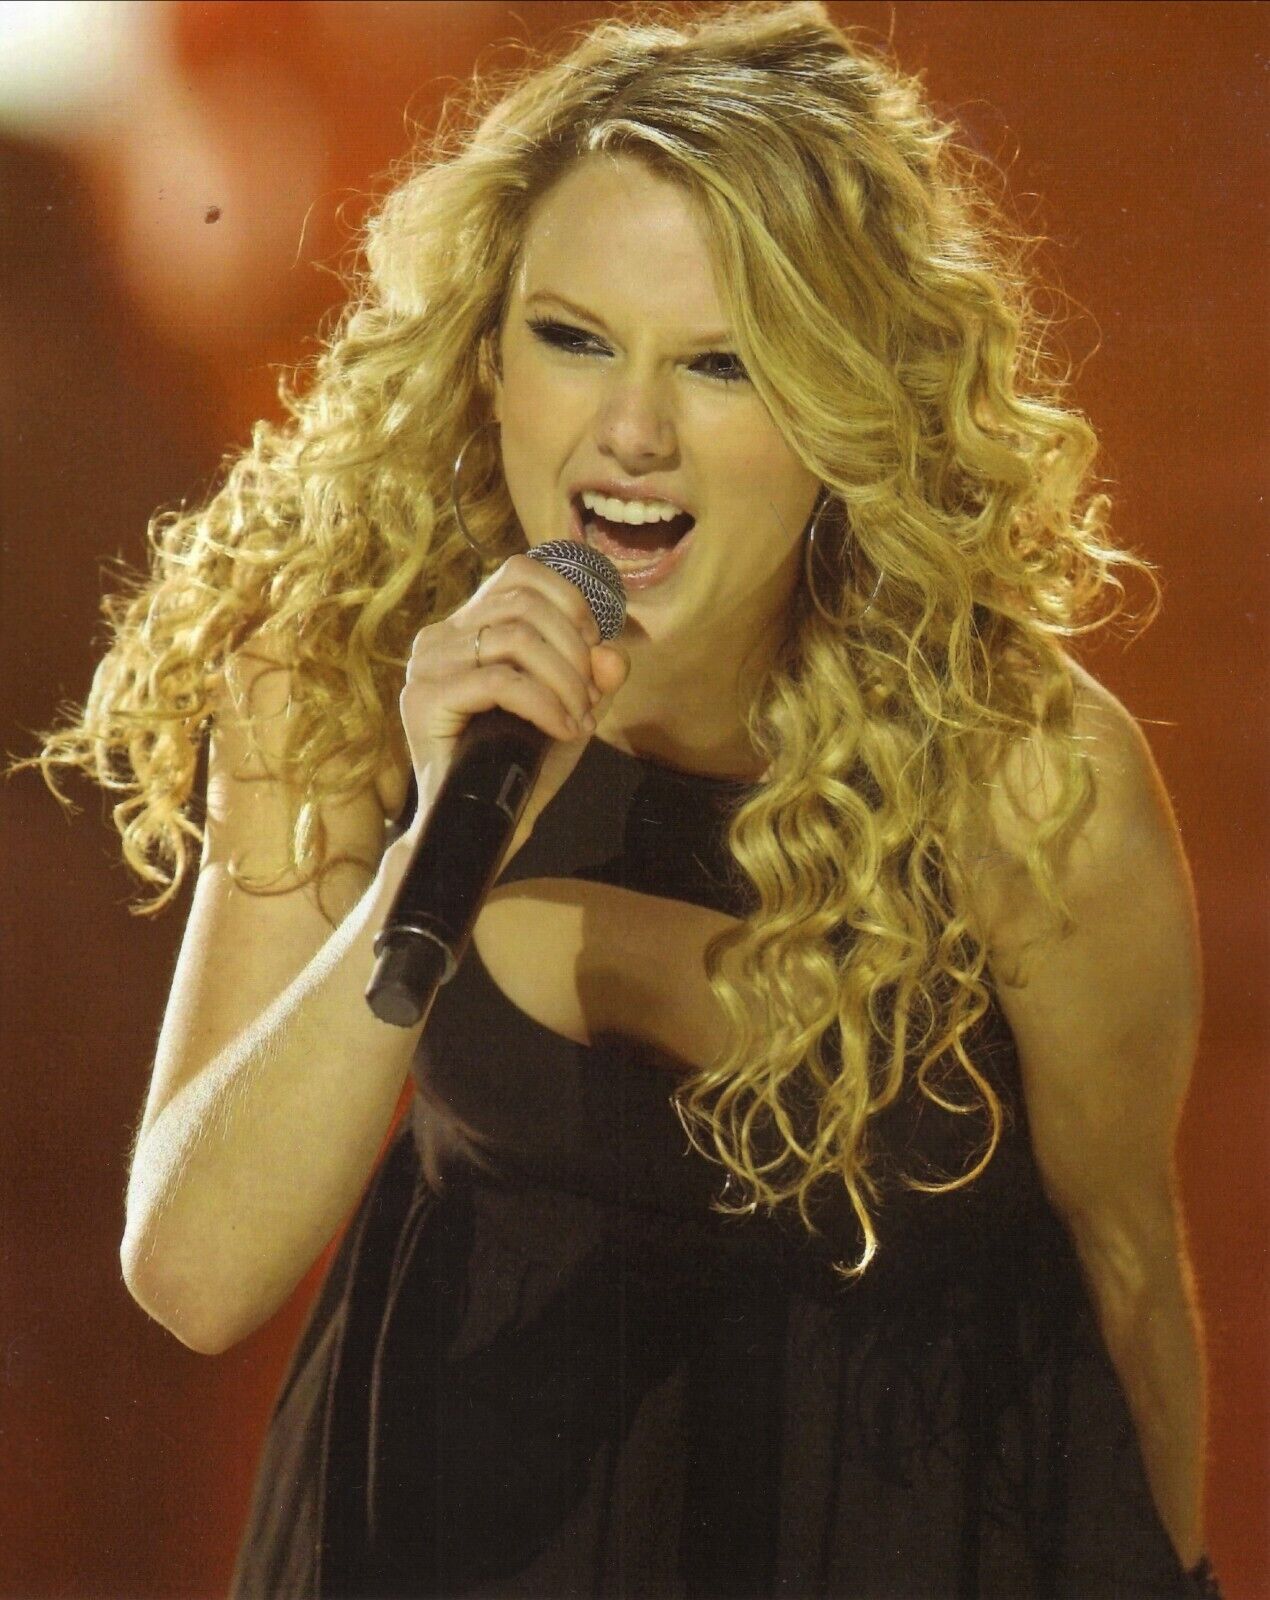 Taylor Swift--Glossy 8x10 Color Photo